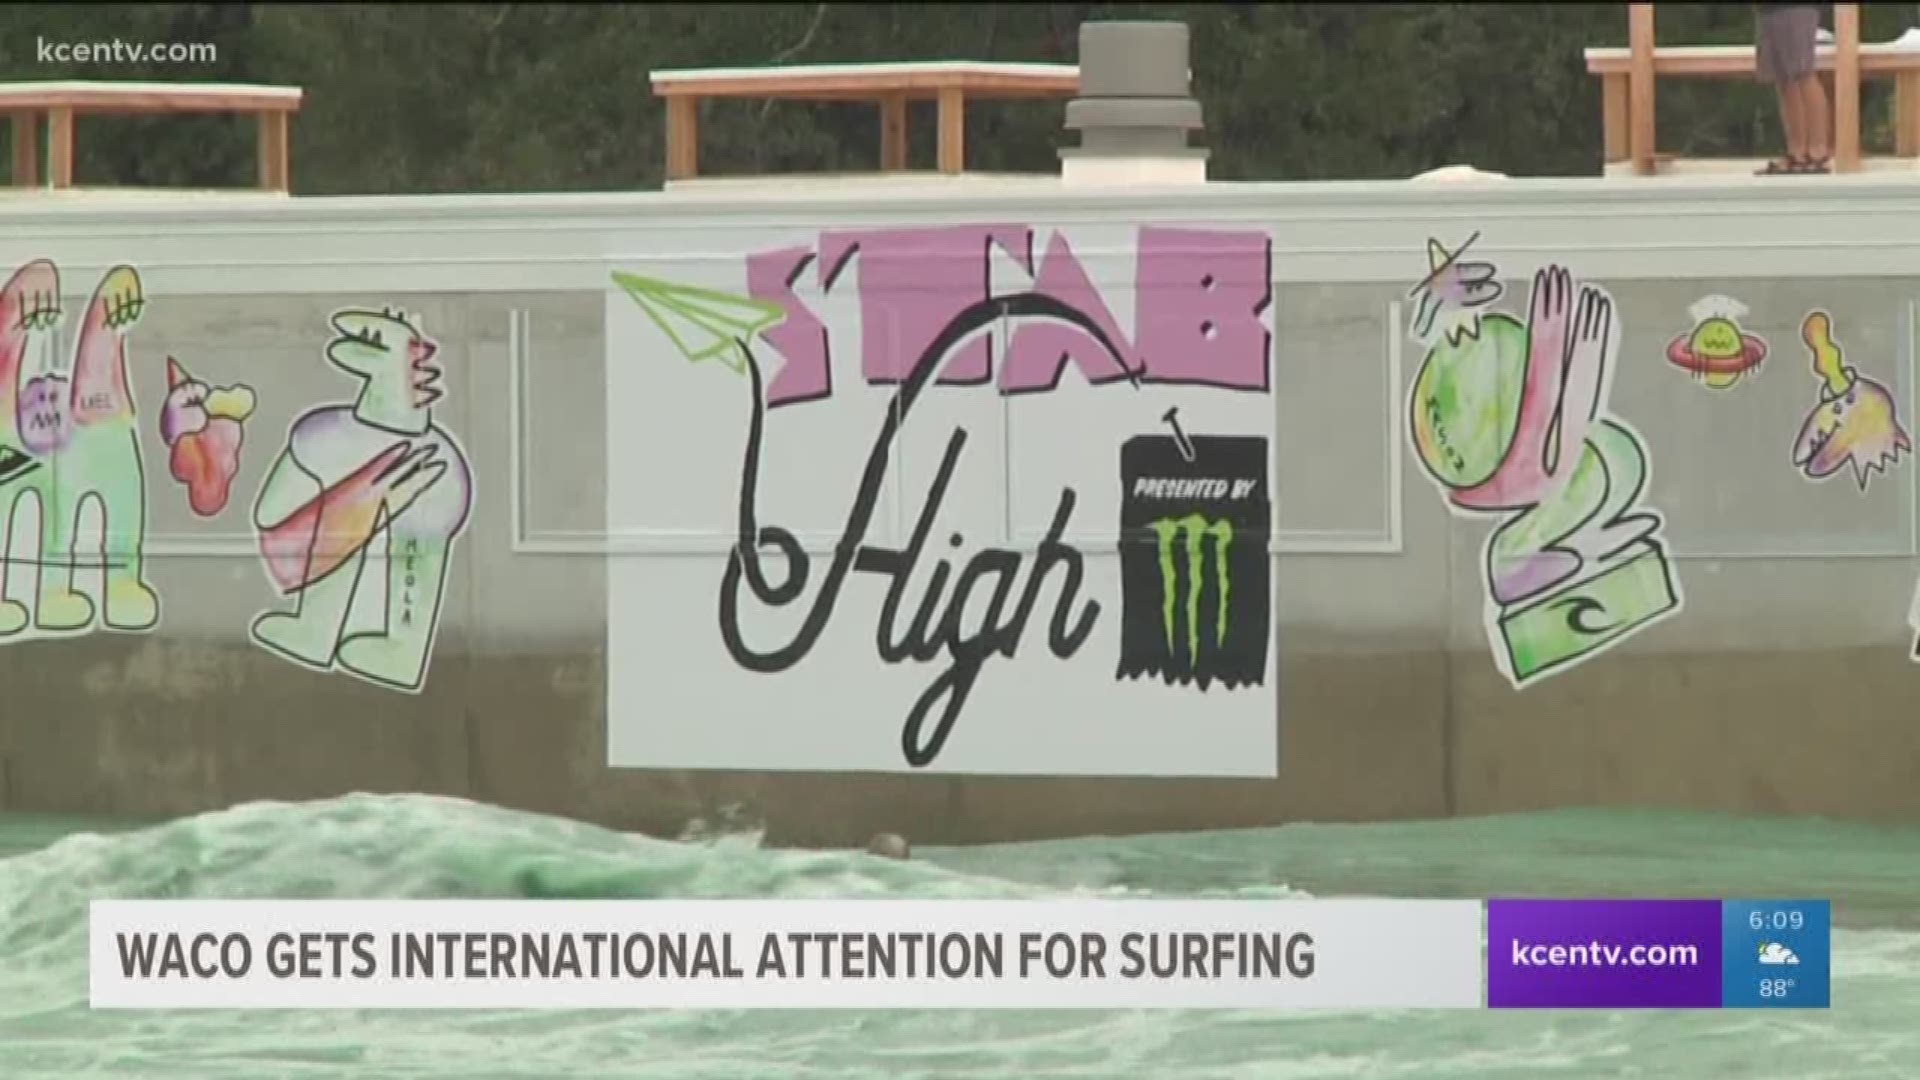 The Stab High competition is between 20 of the best surfers around the world and will be streamed internationally.